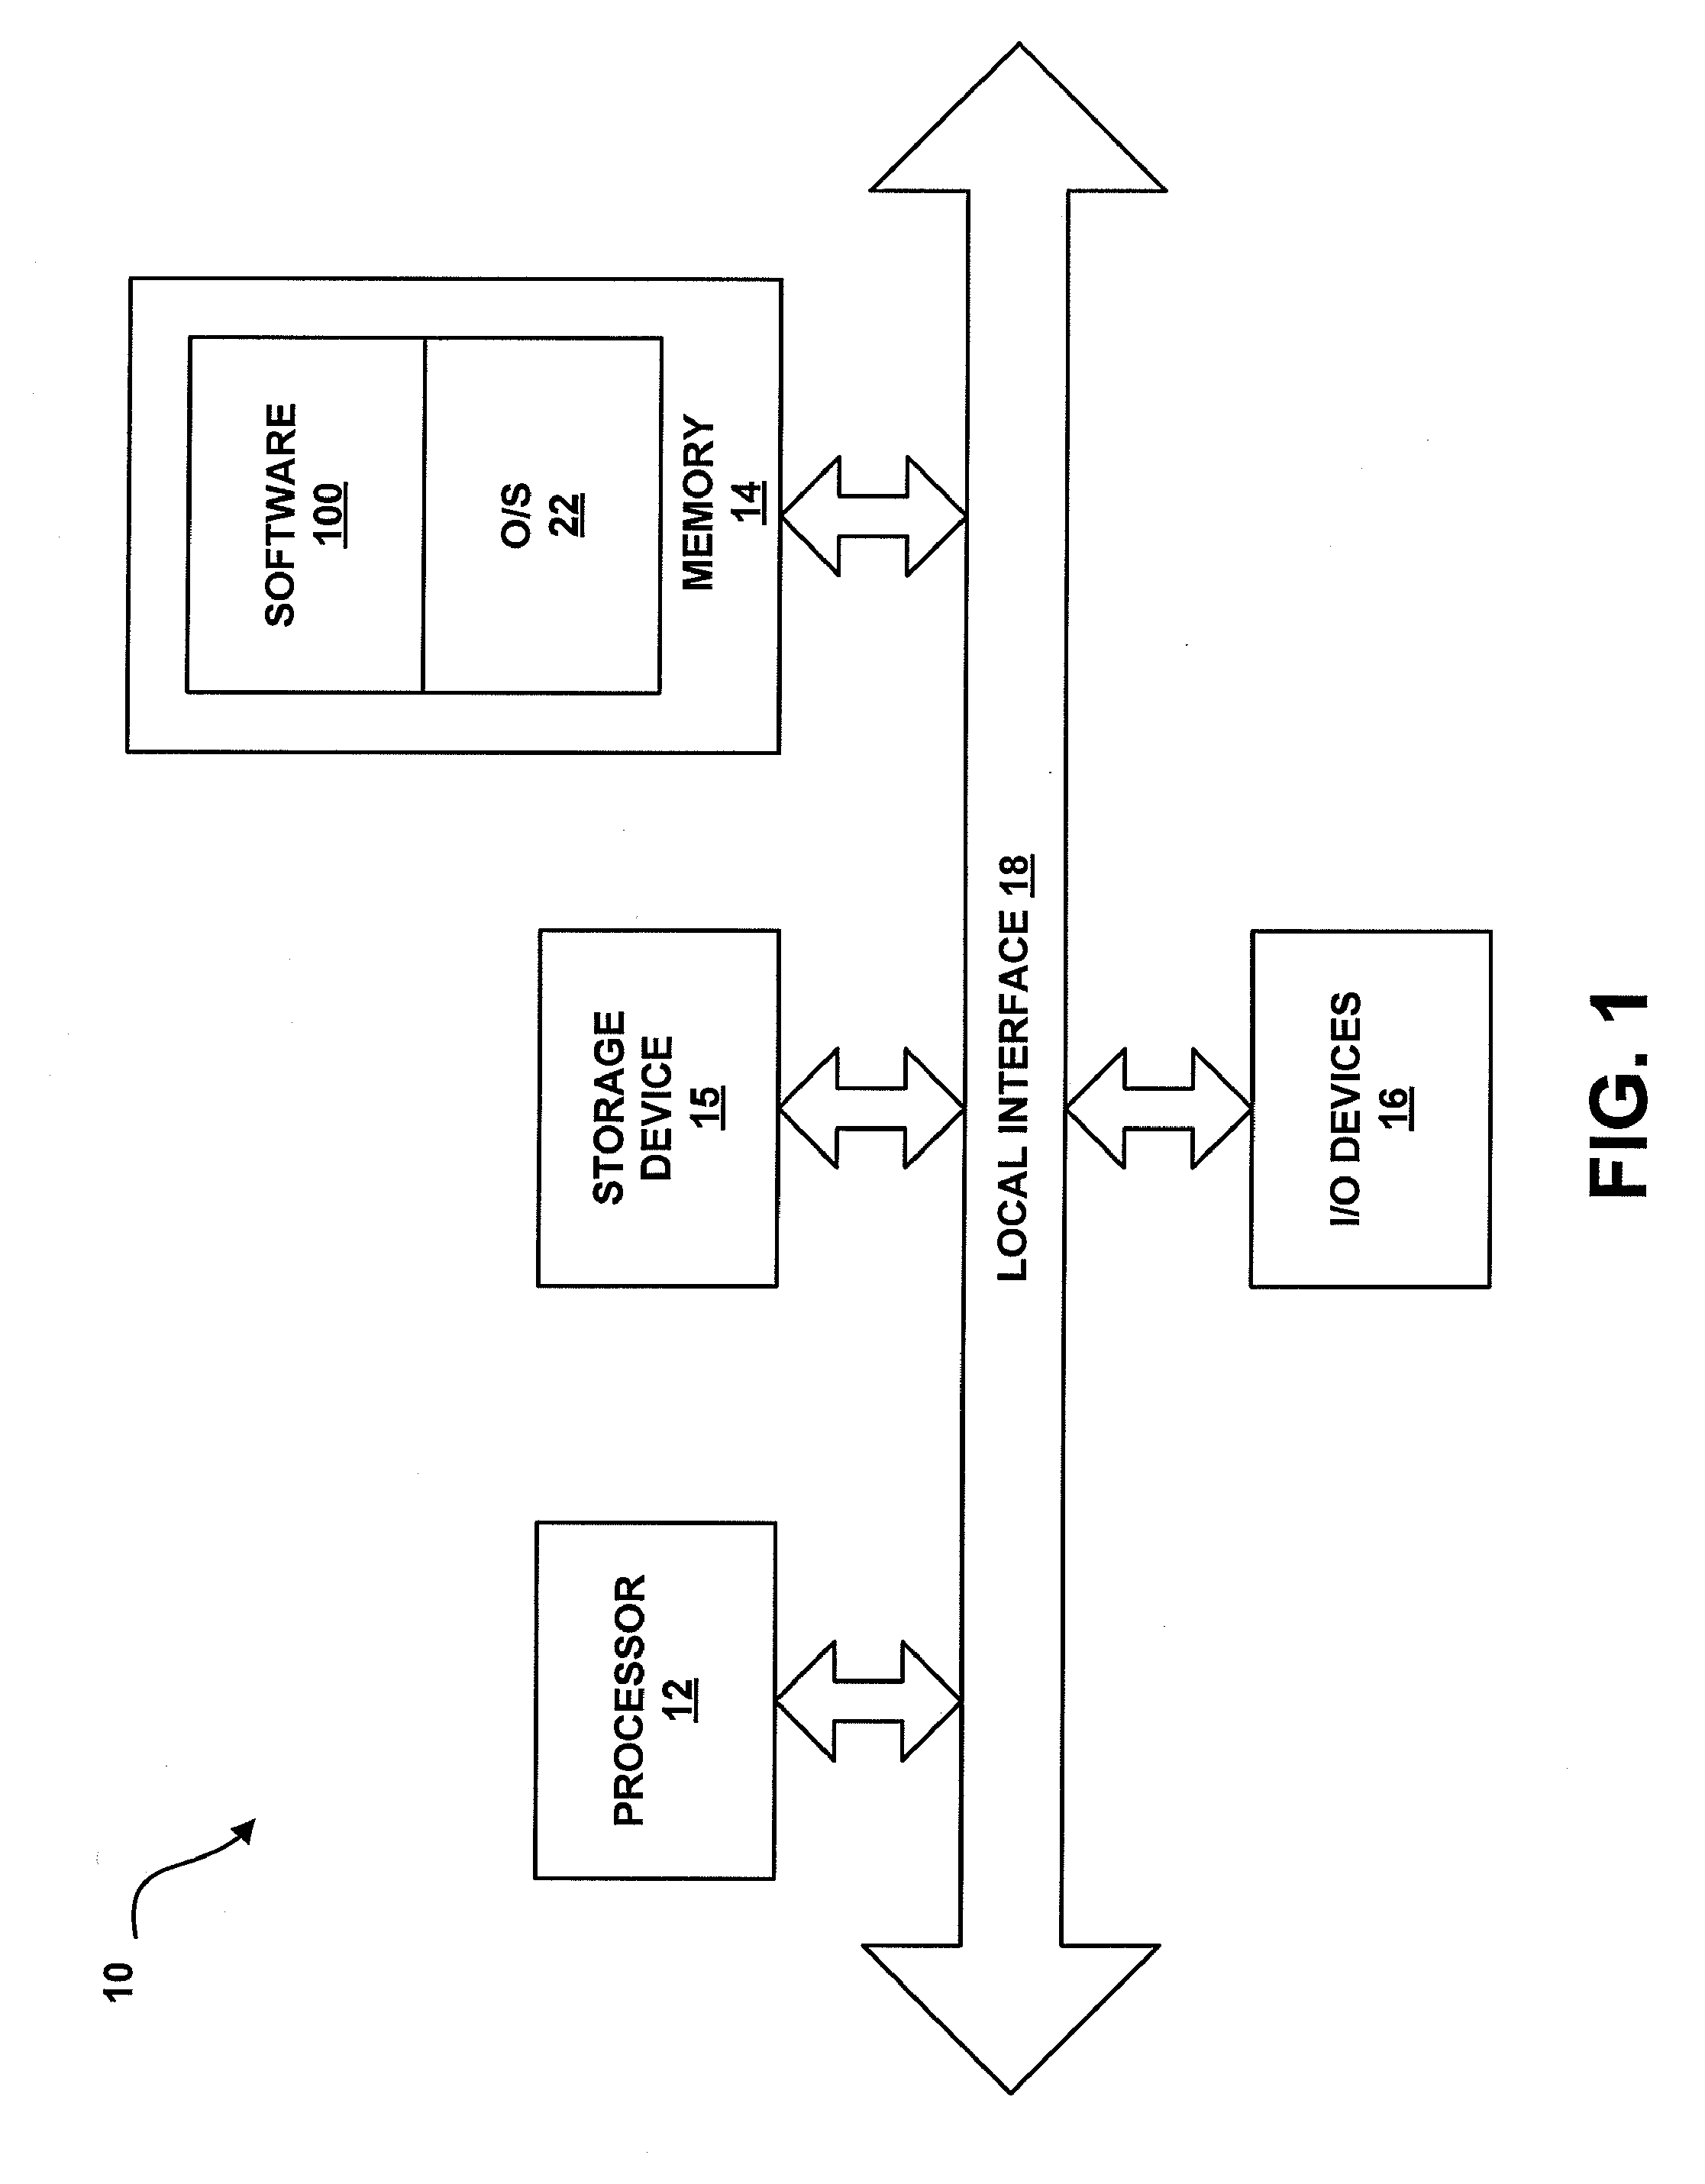 System and method for visually building a market simulation